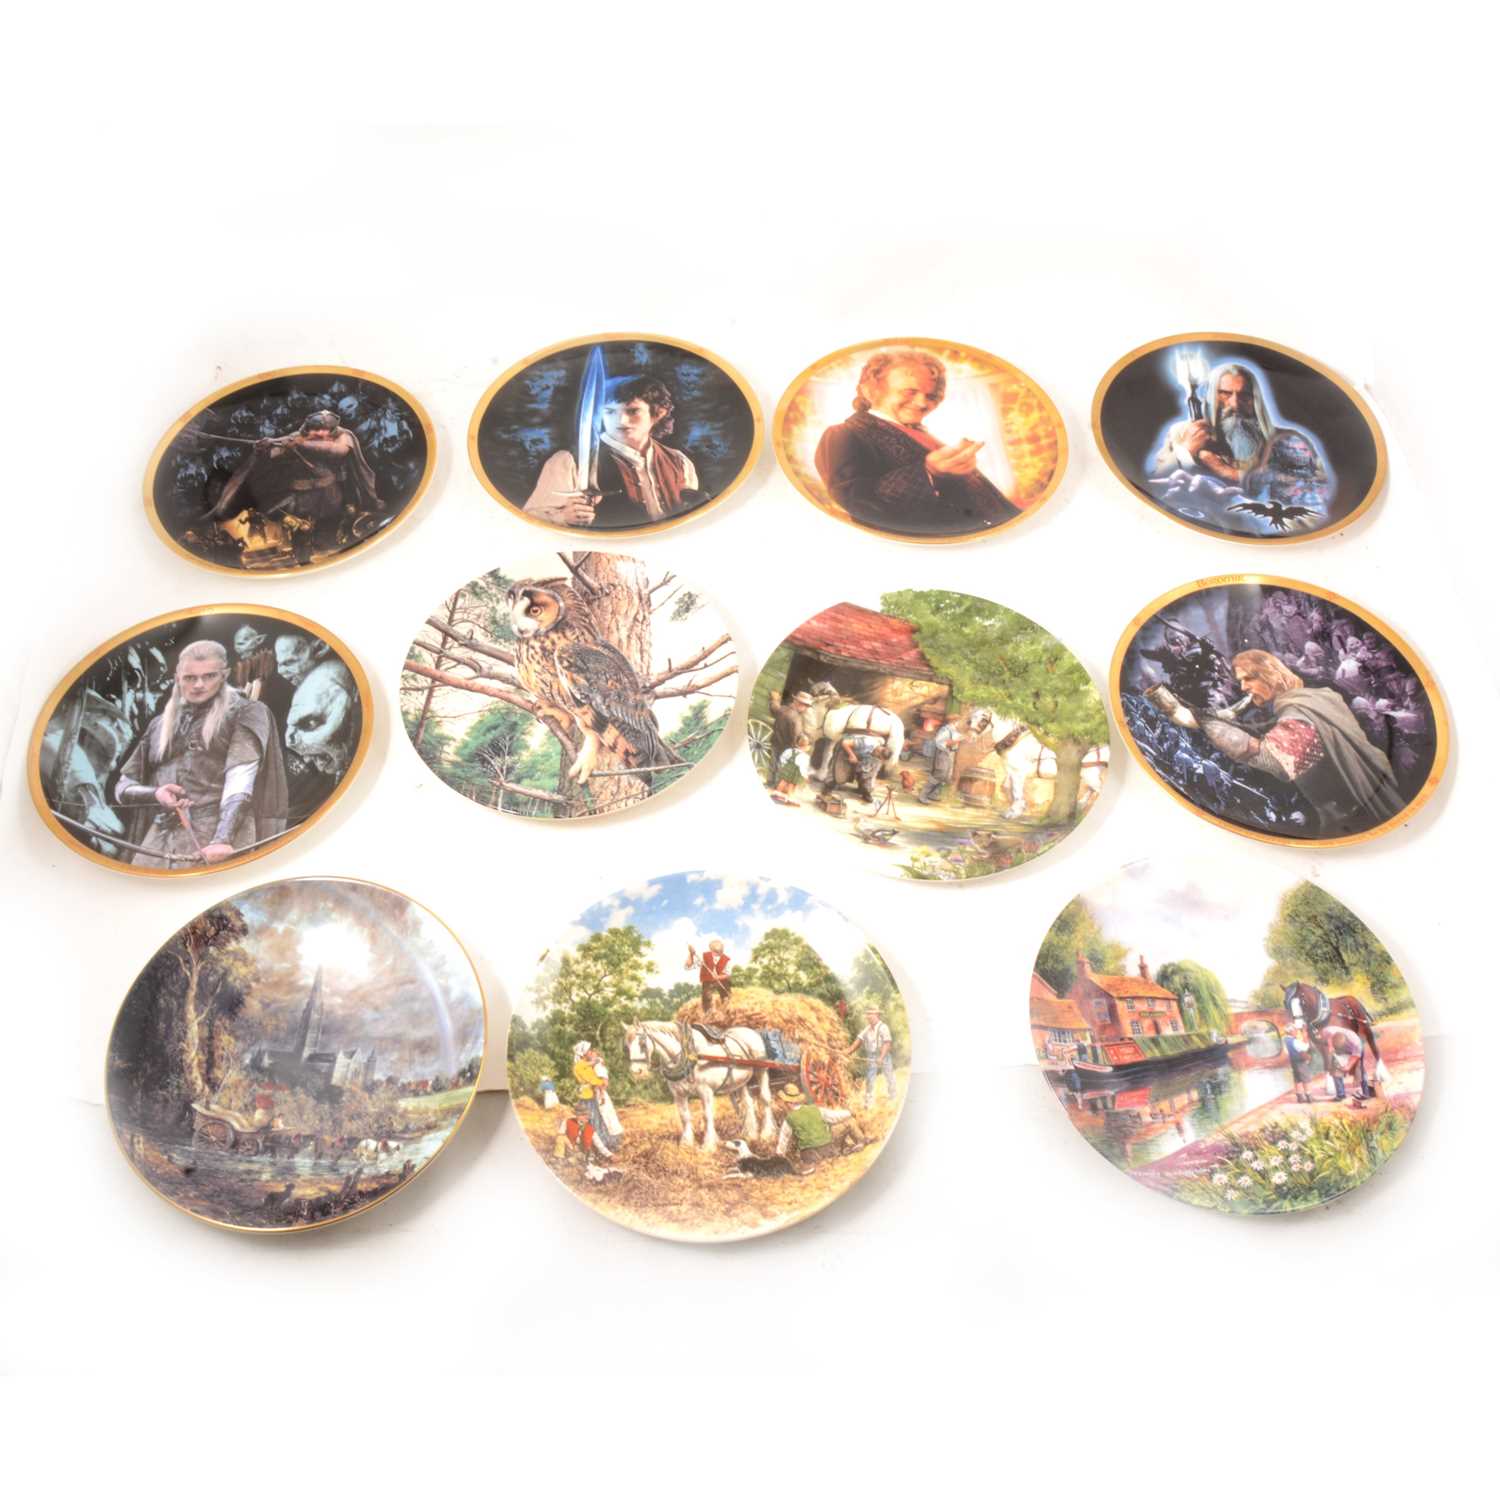 Lot 124 - Lord of the Rings collectors plates by Danbury Mint Wedgwood, and other collectors plates.